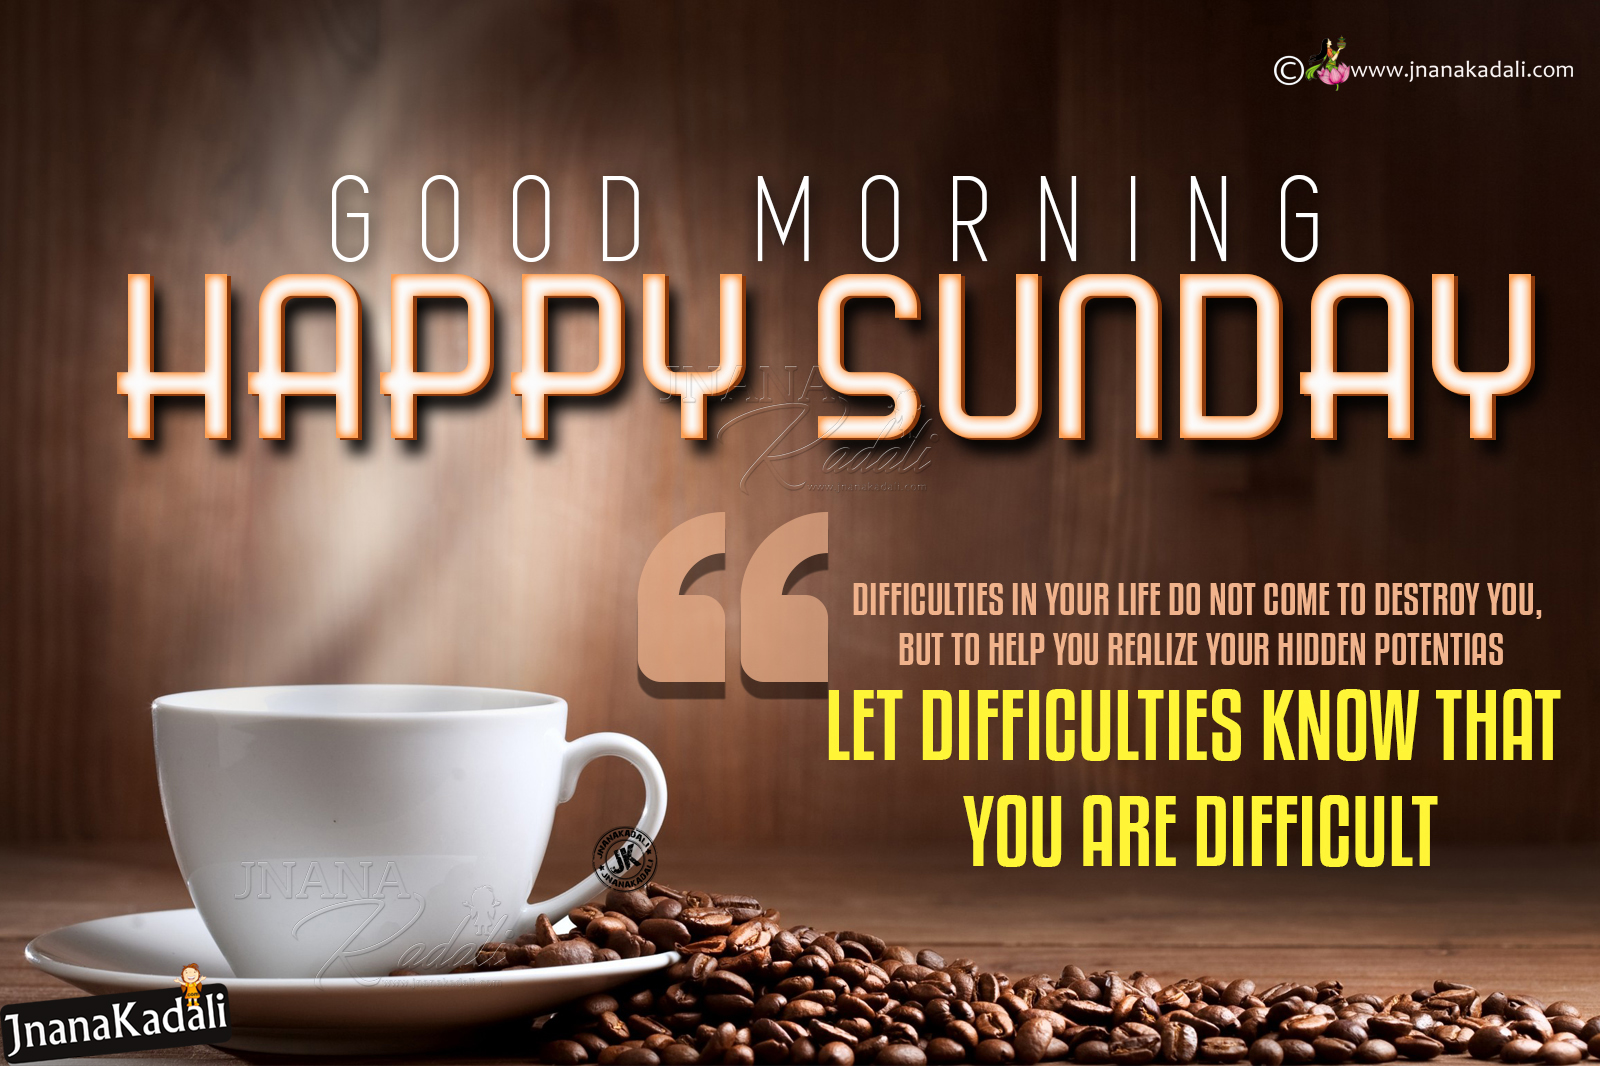 happy sunday quotes best sunday wishes quotes hd wallpapers happy sunday online greetings Happy Sunday English Quotes Keep Smiling Have a happy Sunday